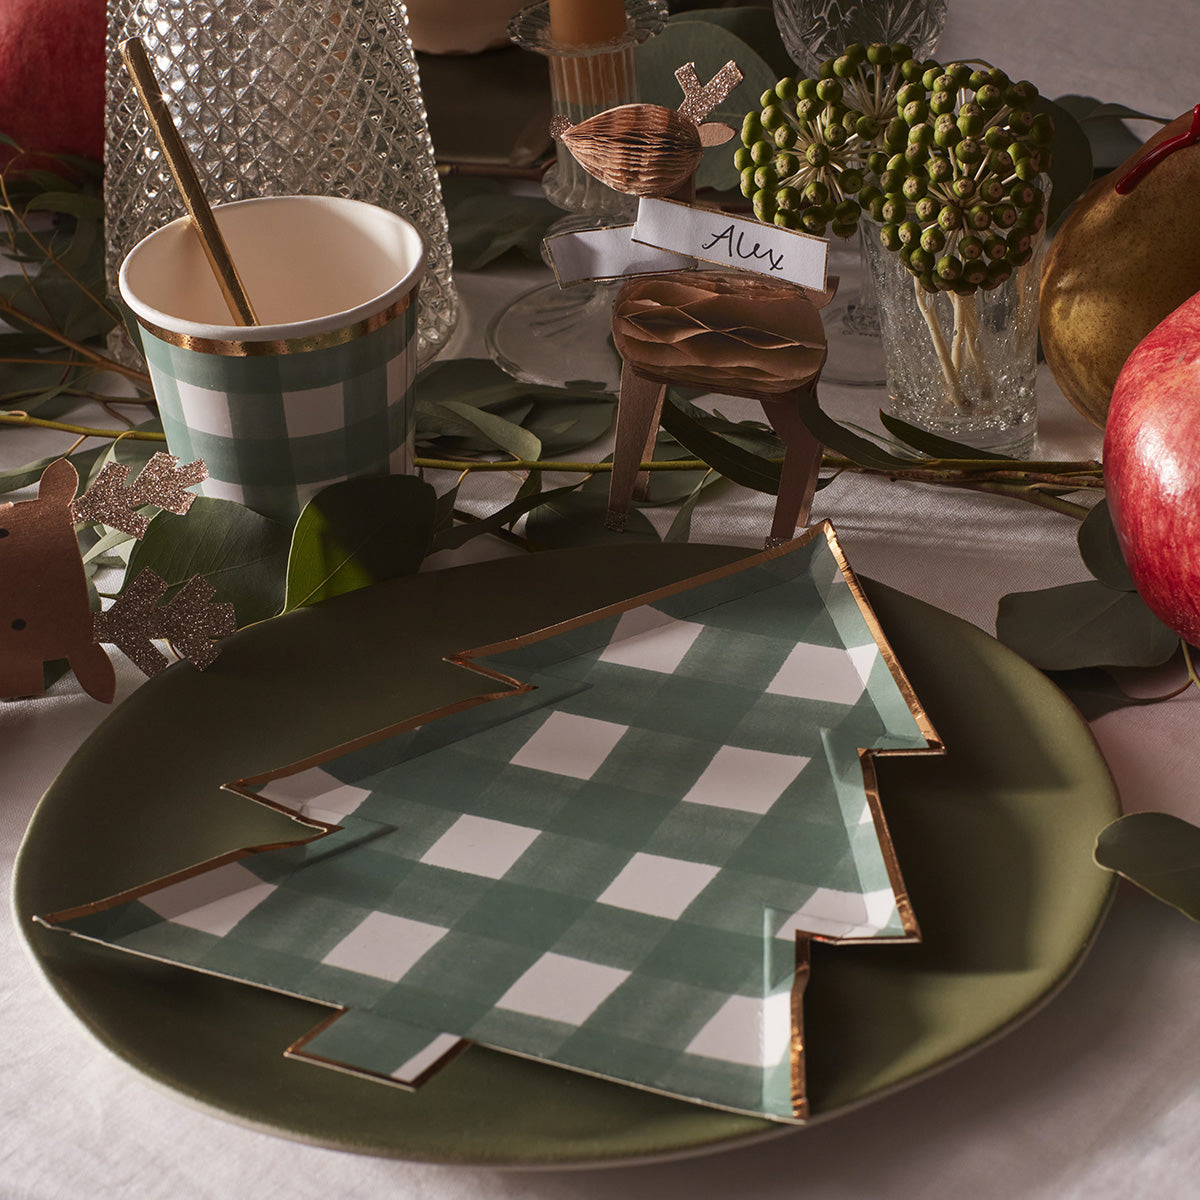 Our Christmas tree plates, with gorgeous gingham design, will look spectacular at your Christmas table setting.